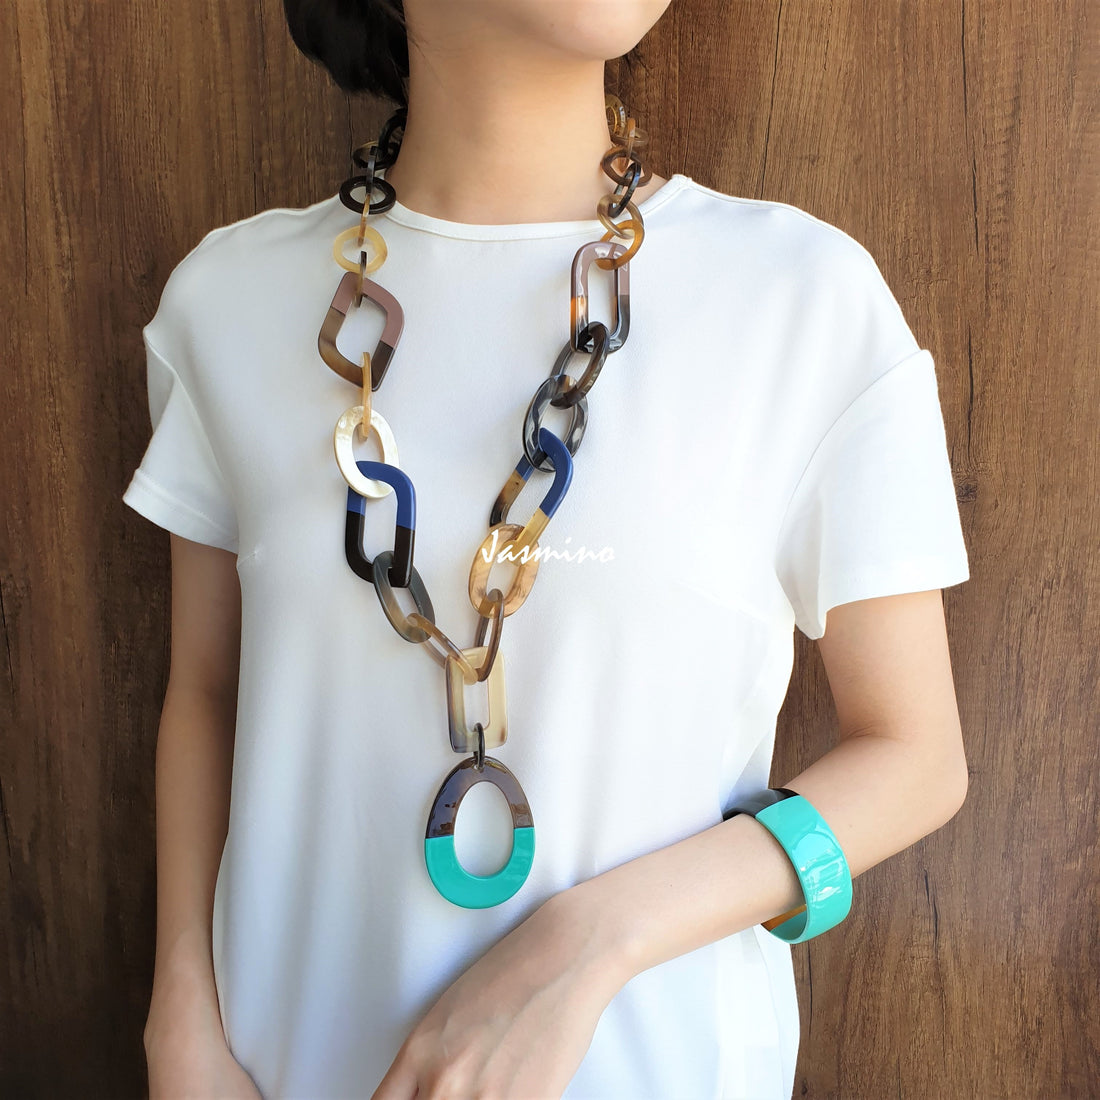 Jasmino unique handmade Bohemian chain link necklace features blue and turquoise in natural buffalo horn for women's gifts